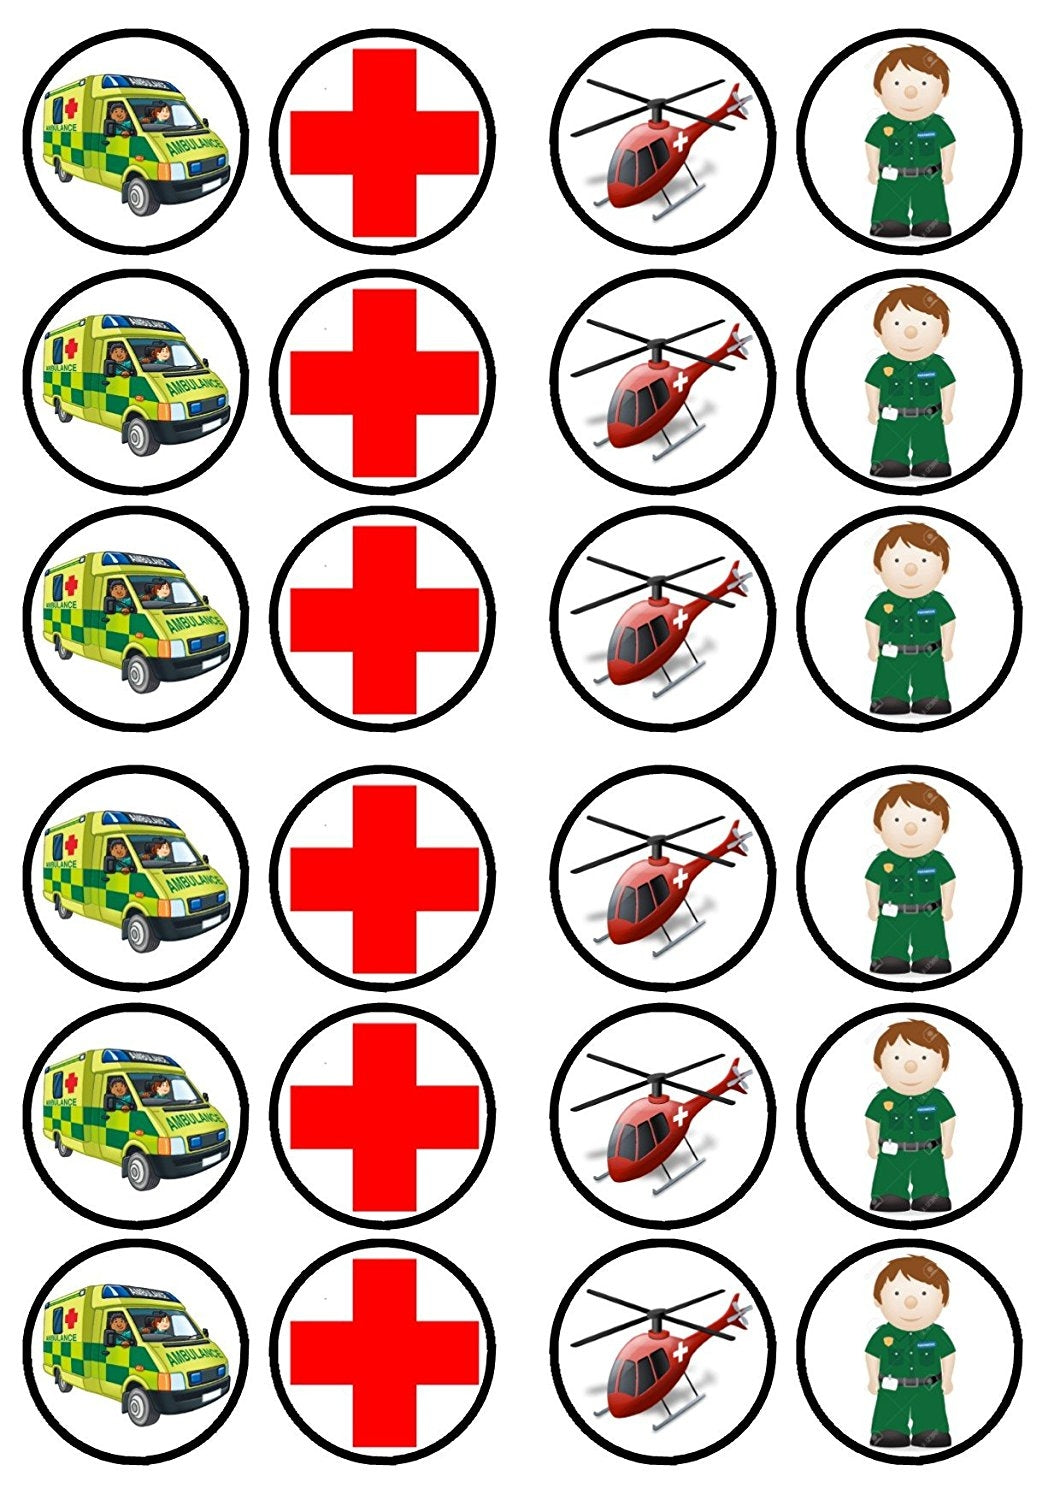 First Aid Ambulance Doctor Helicopter Edible Cupcake Topper Images ABPID05844